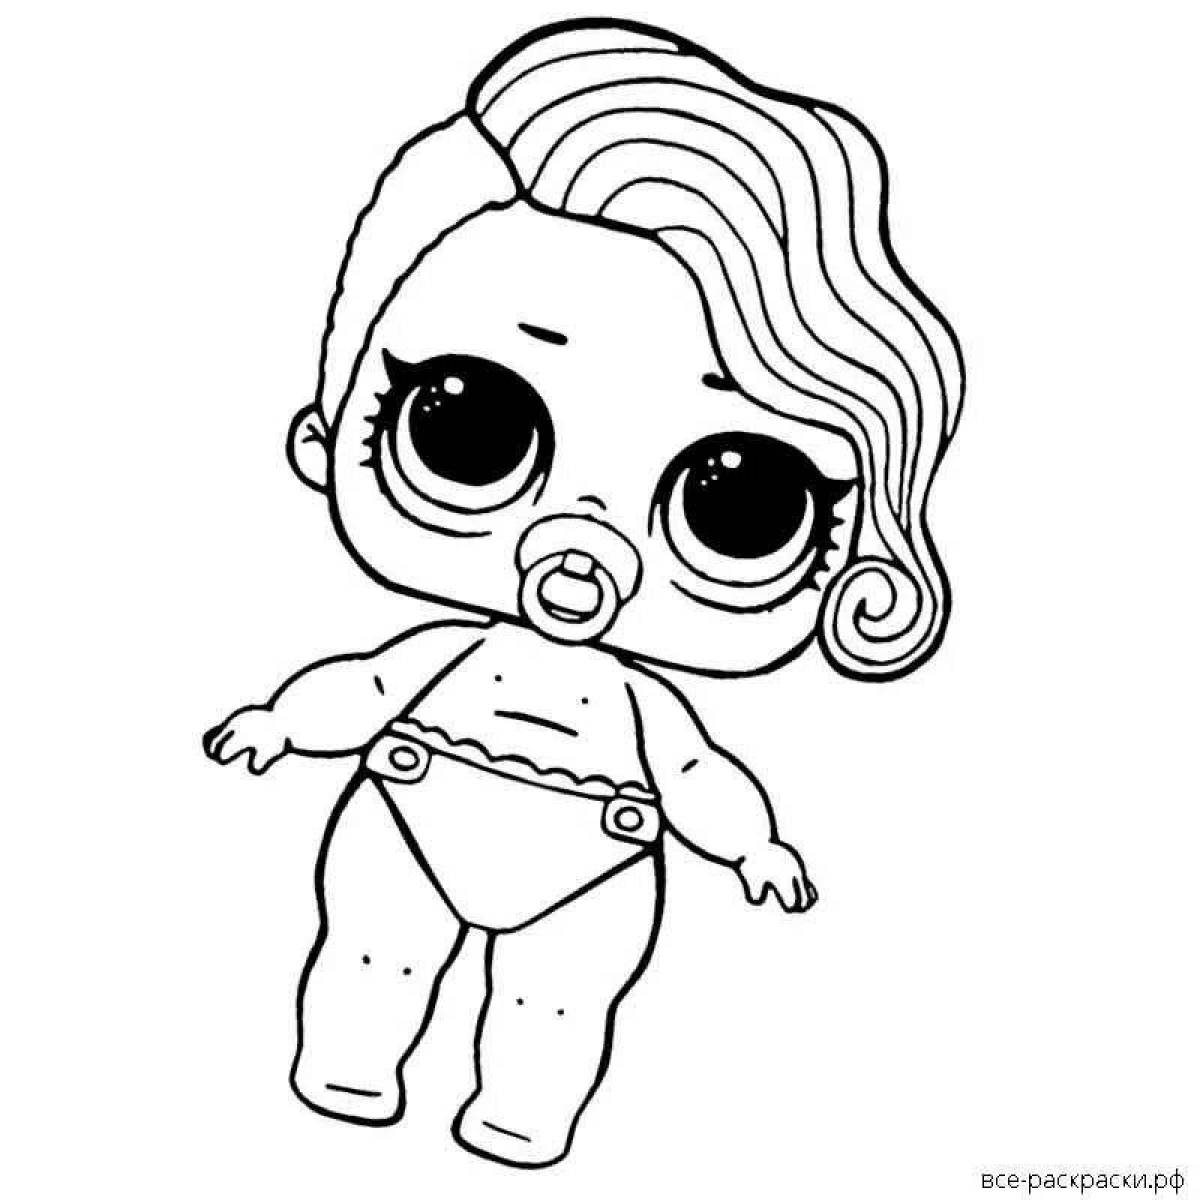 Cute coloring lol doll in swimsuit